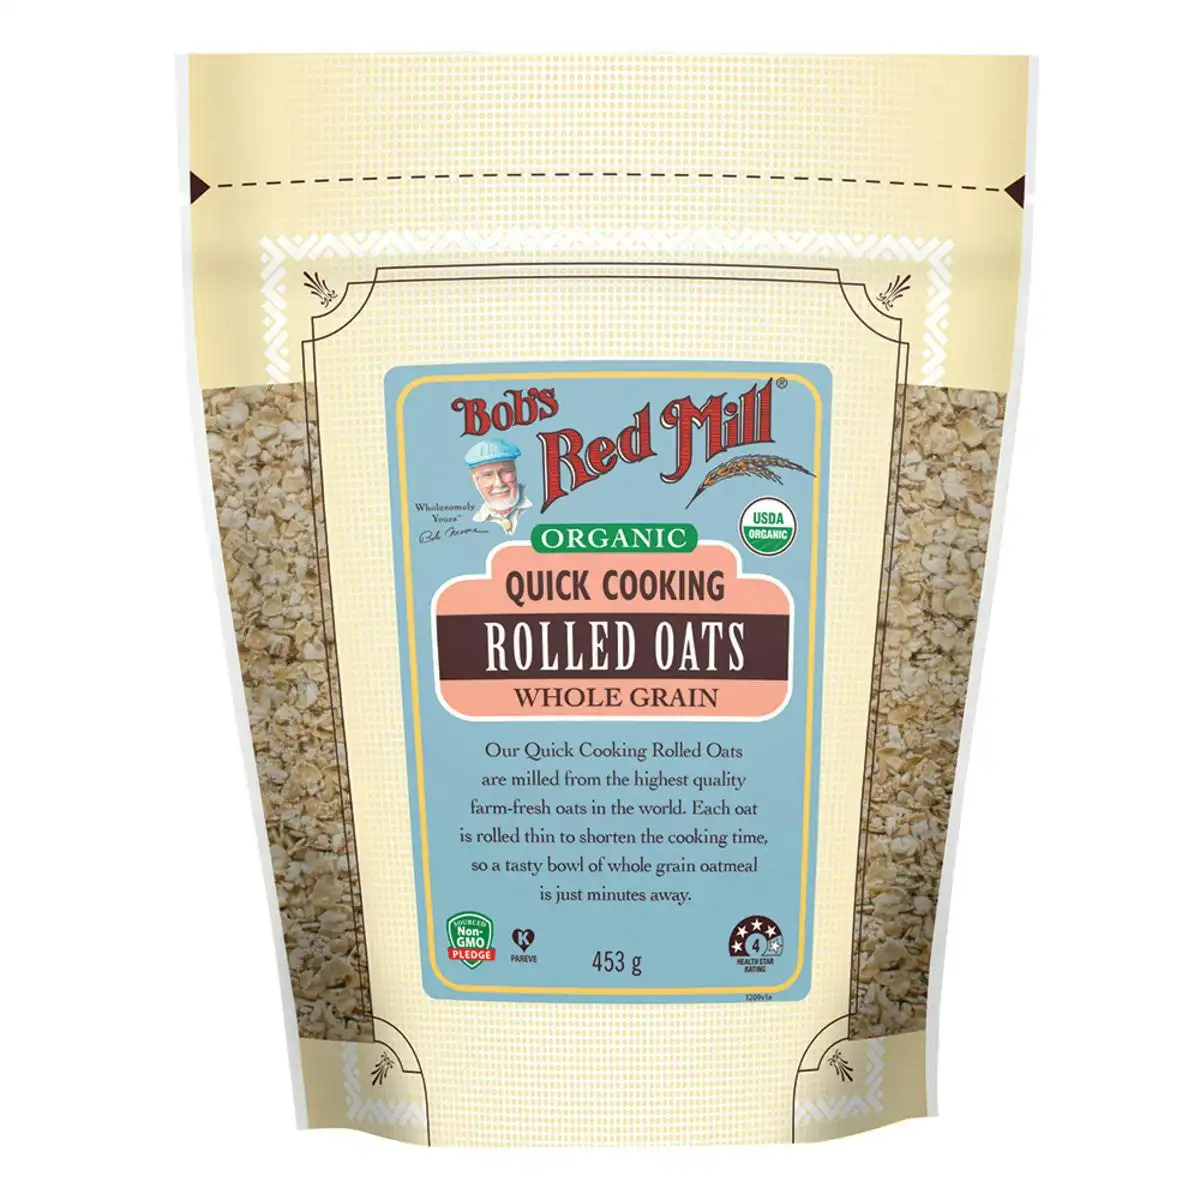 Bob's Red Mill Organic Quick Cooking Rolled Oats (Whole Grain) 453g